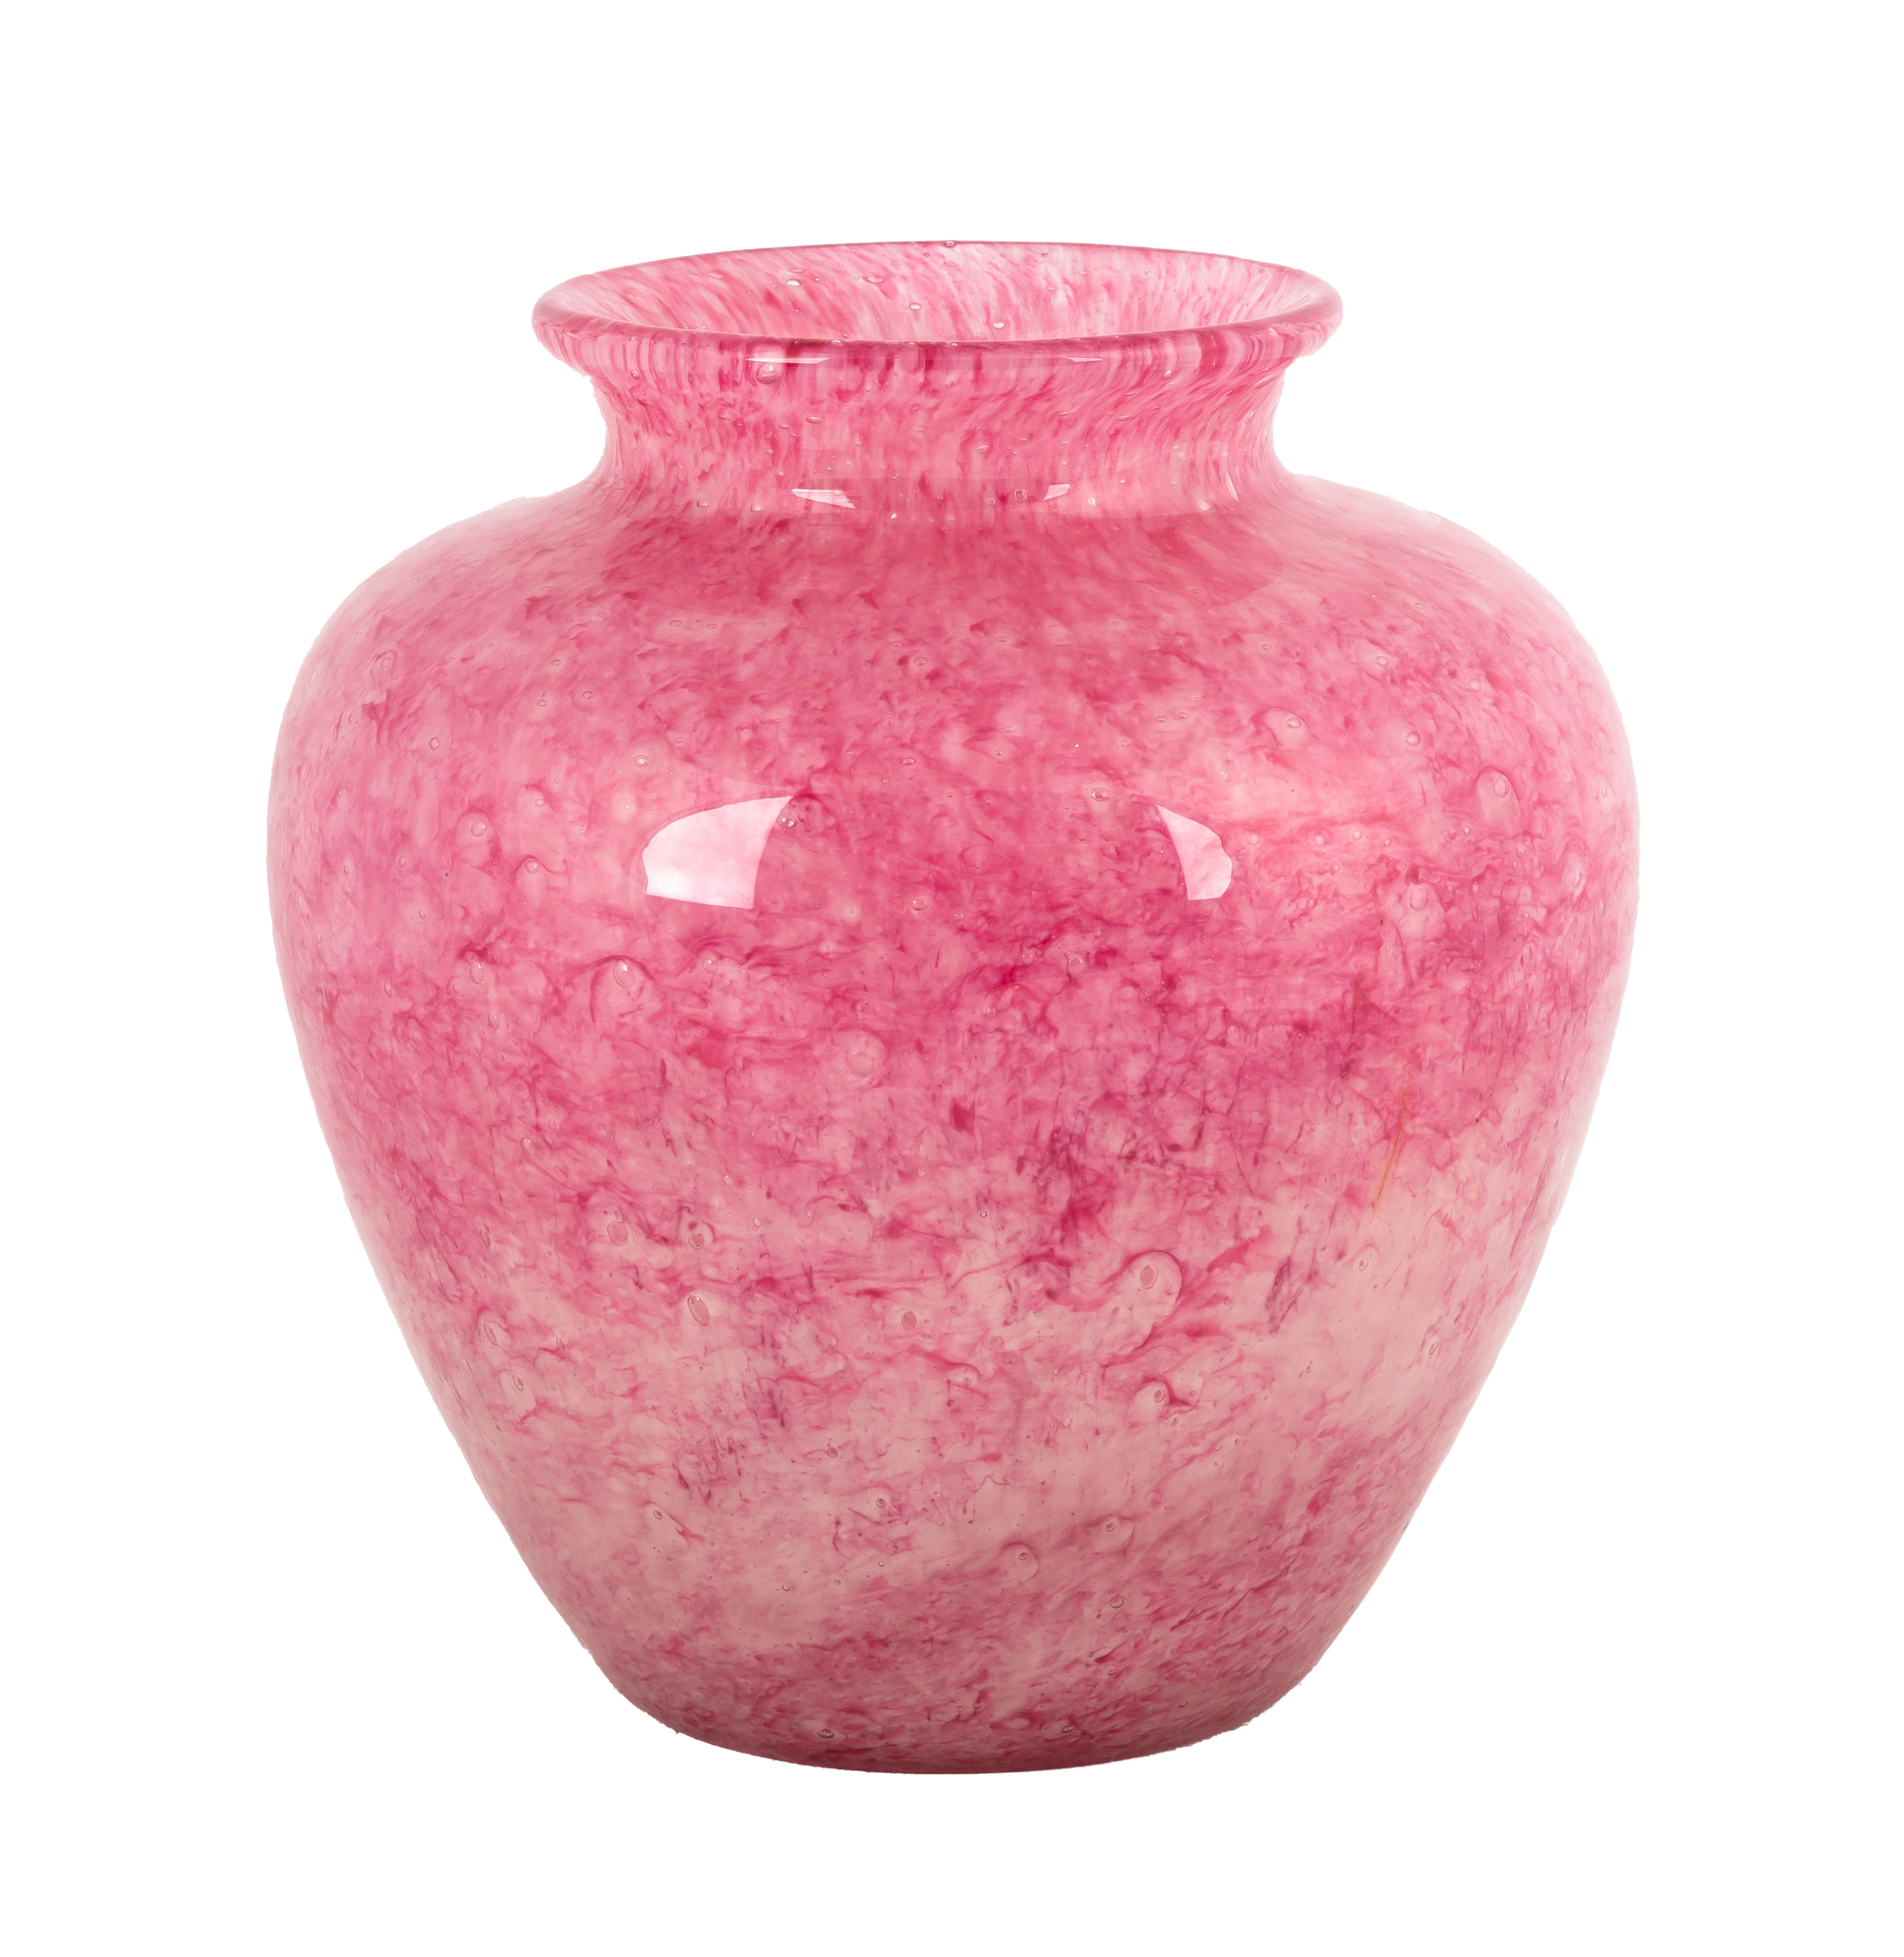 STEUBEN PINK CLUTHRA VASE Early 35338a